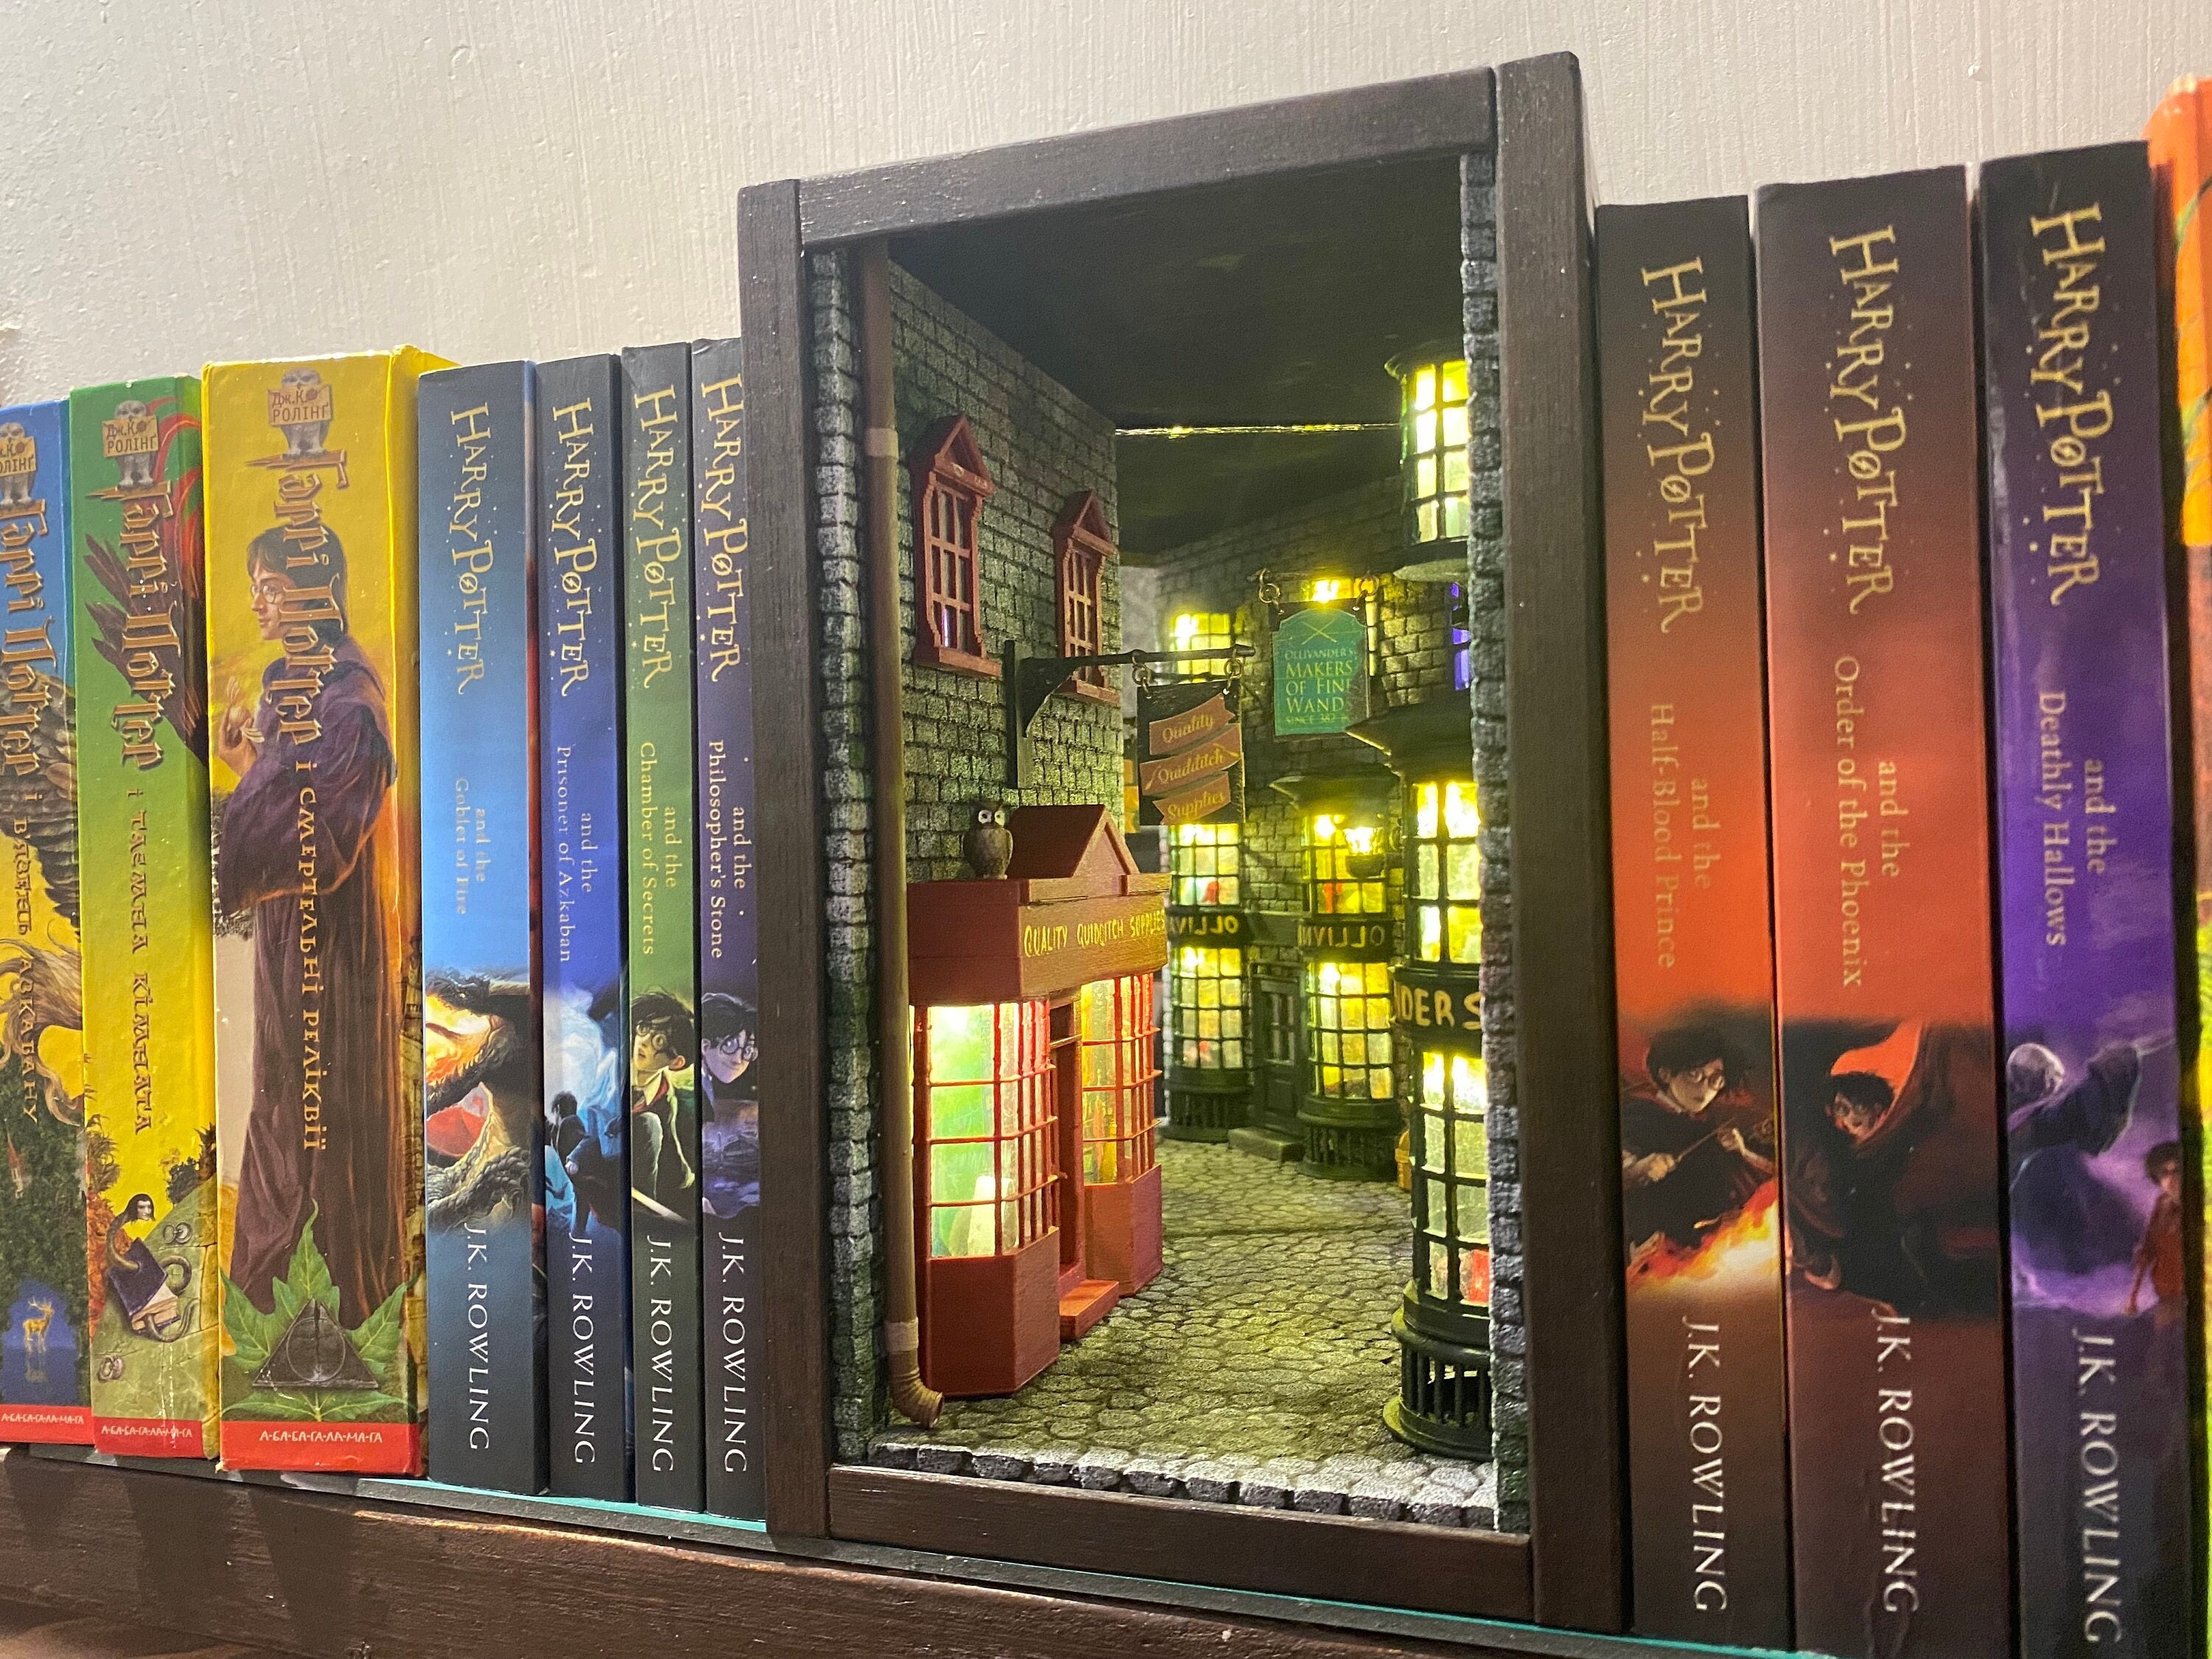 How to build a Harry Potter Book Nook? – Book Nook Store